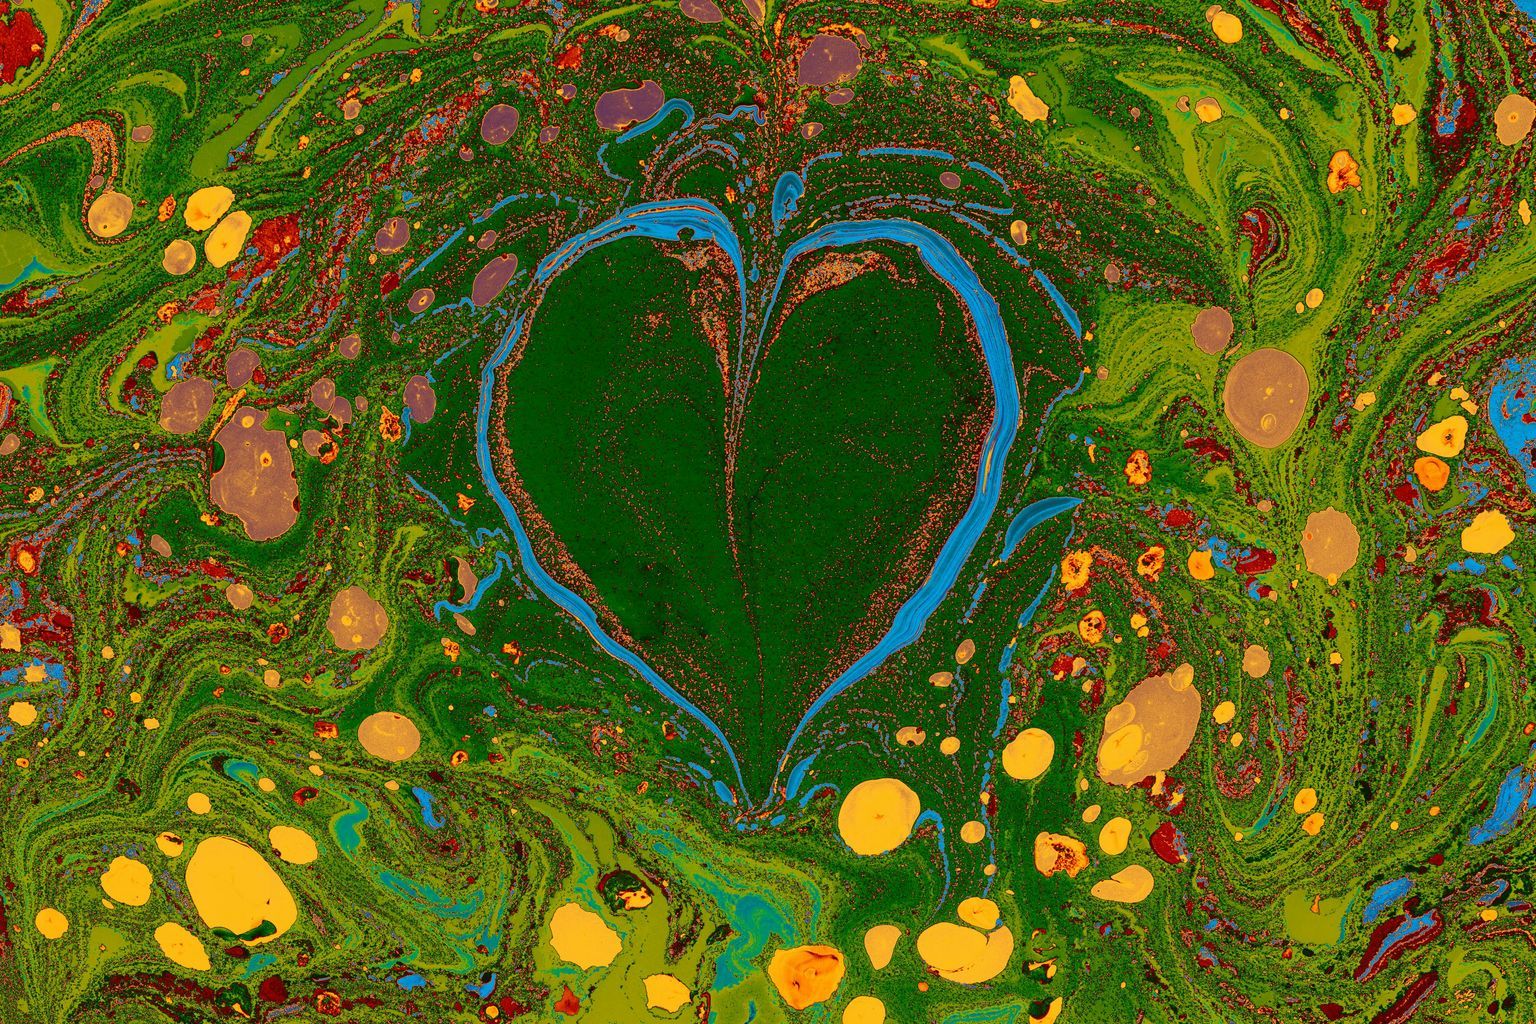 A painting of a heart with green and yellow paint